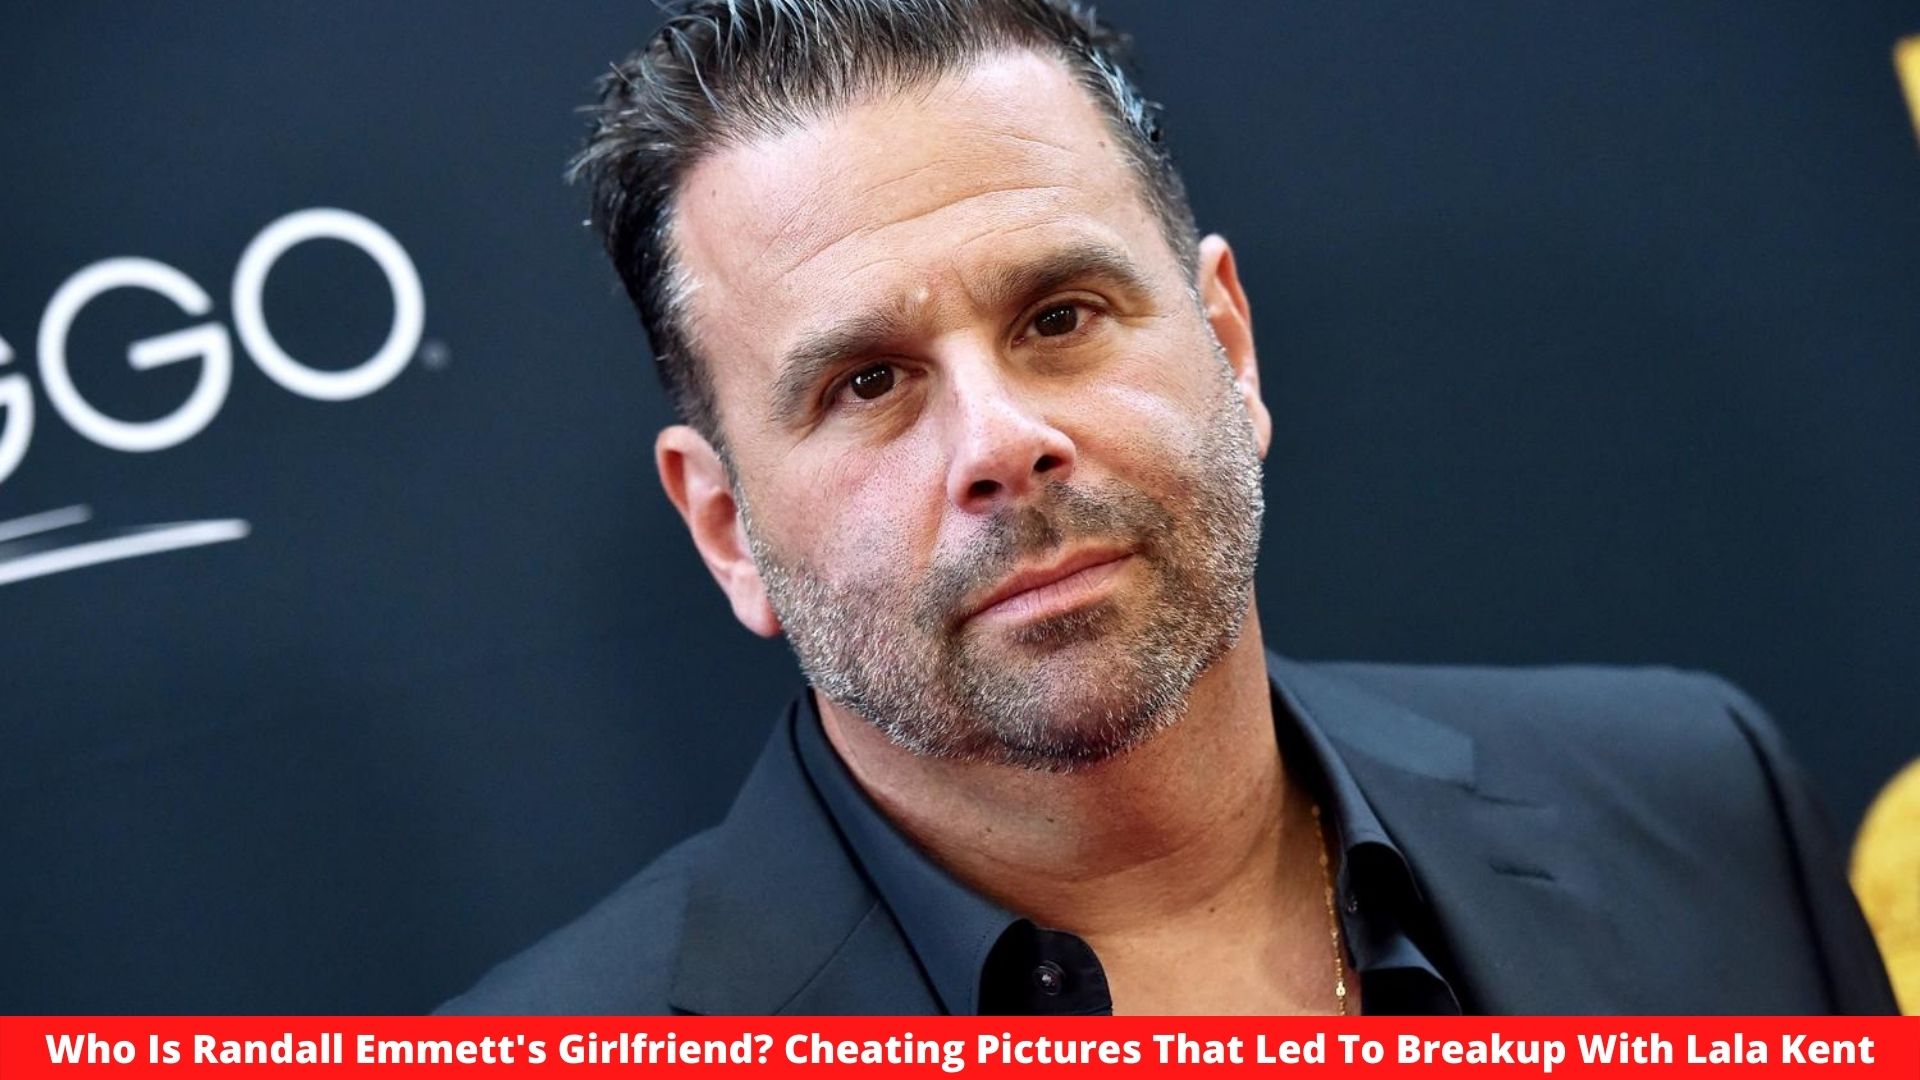 Who Is Randall Emmett's Girlfriend? Cheating Pictures That Led To Breakup With Lala Kent